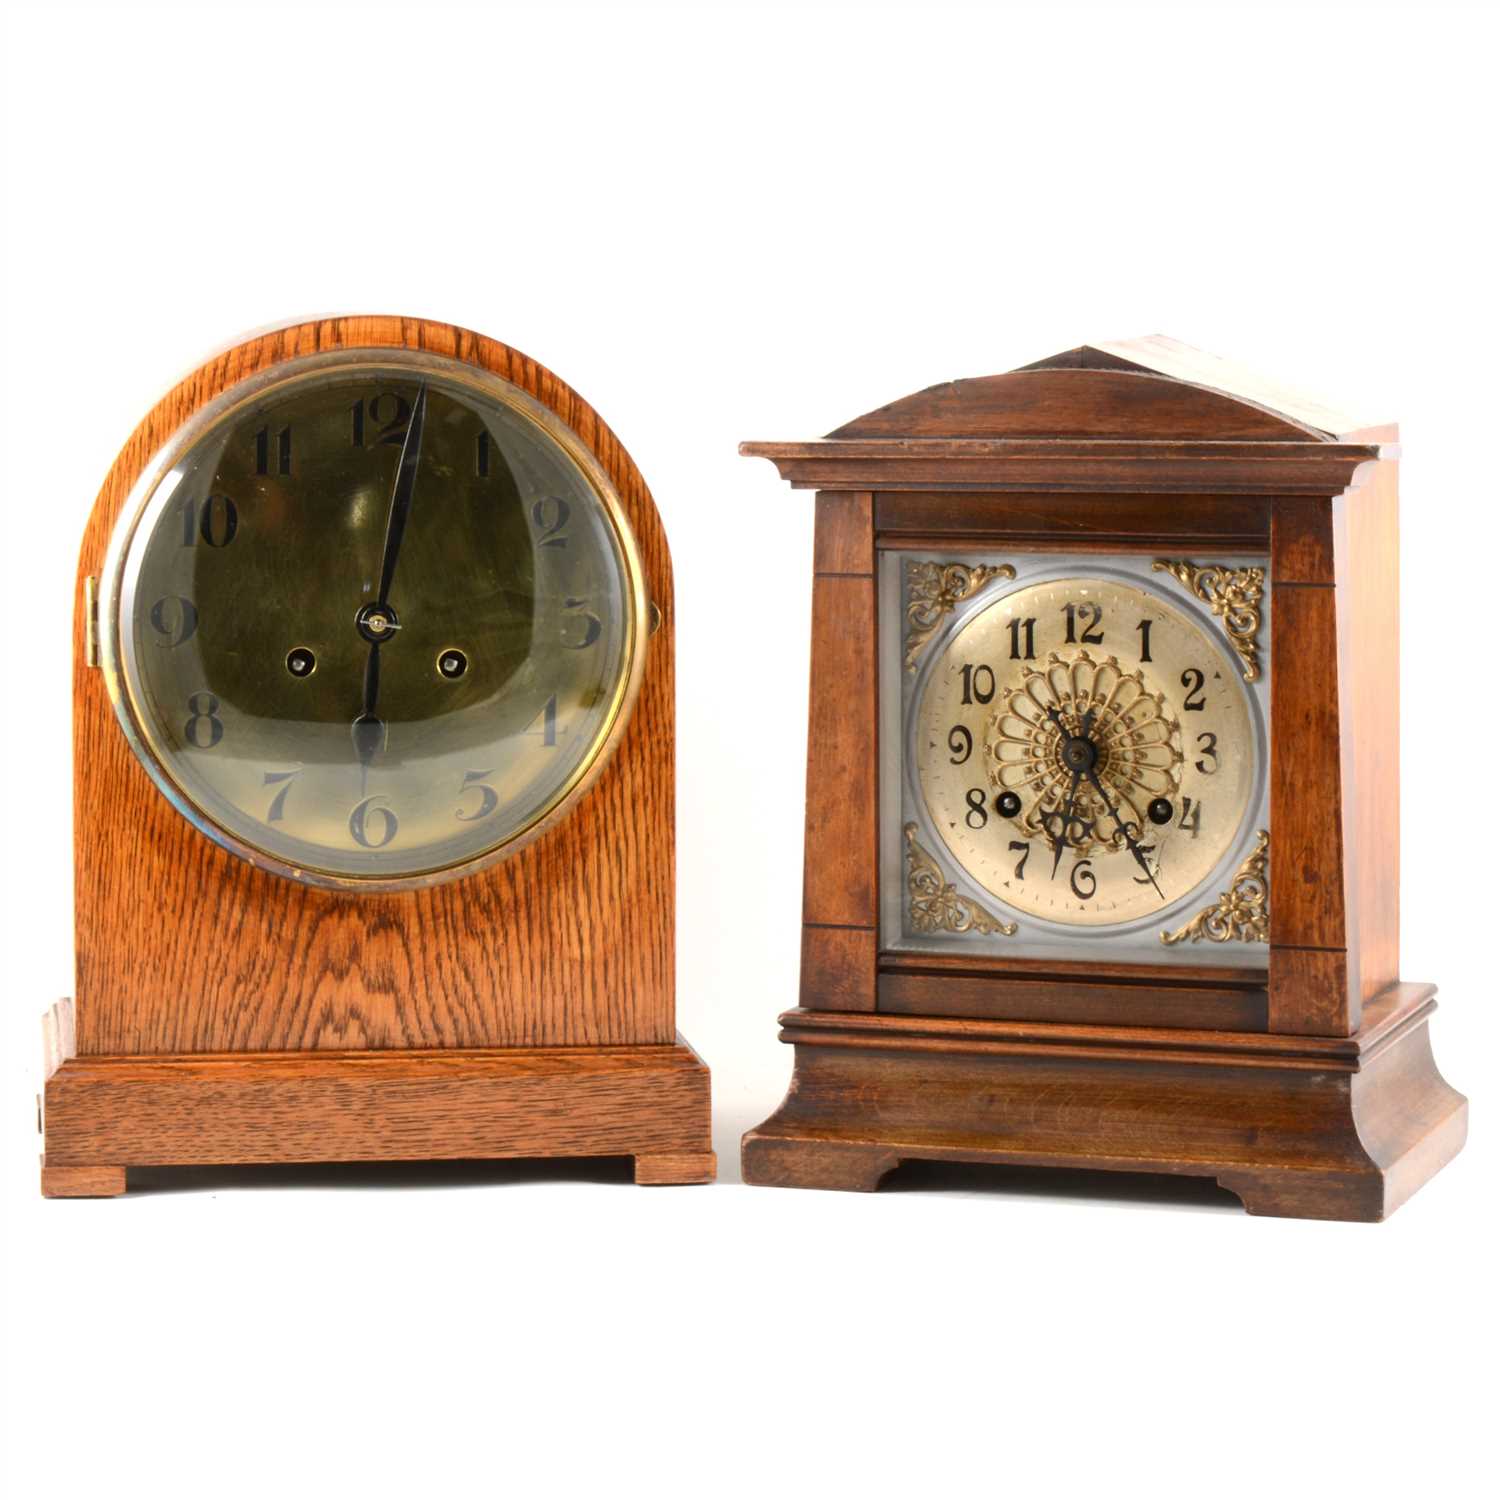 Lot 135 - An oak cased mantel clock with brass dial, and another mahogany shelf clock.